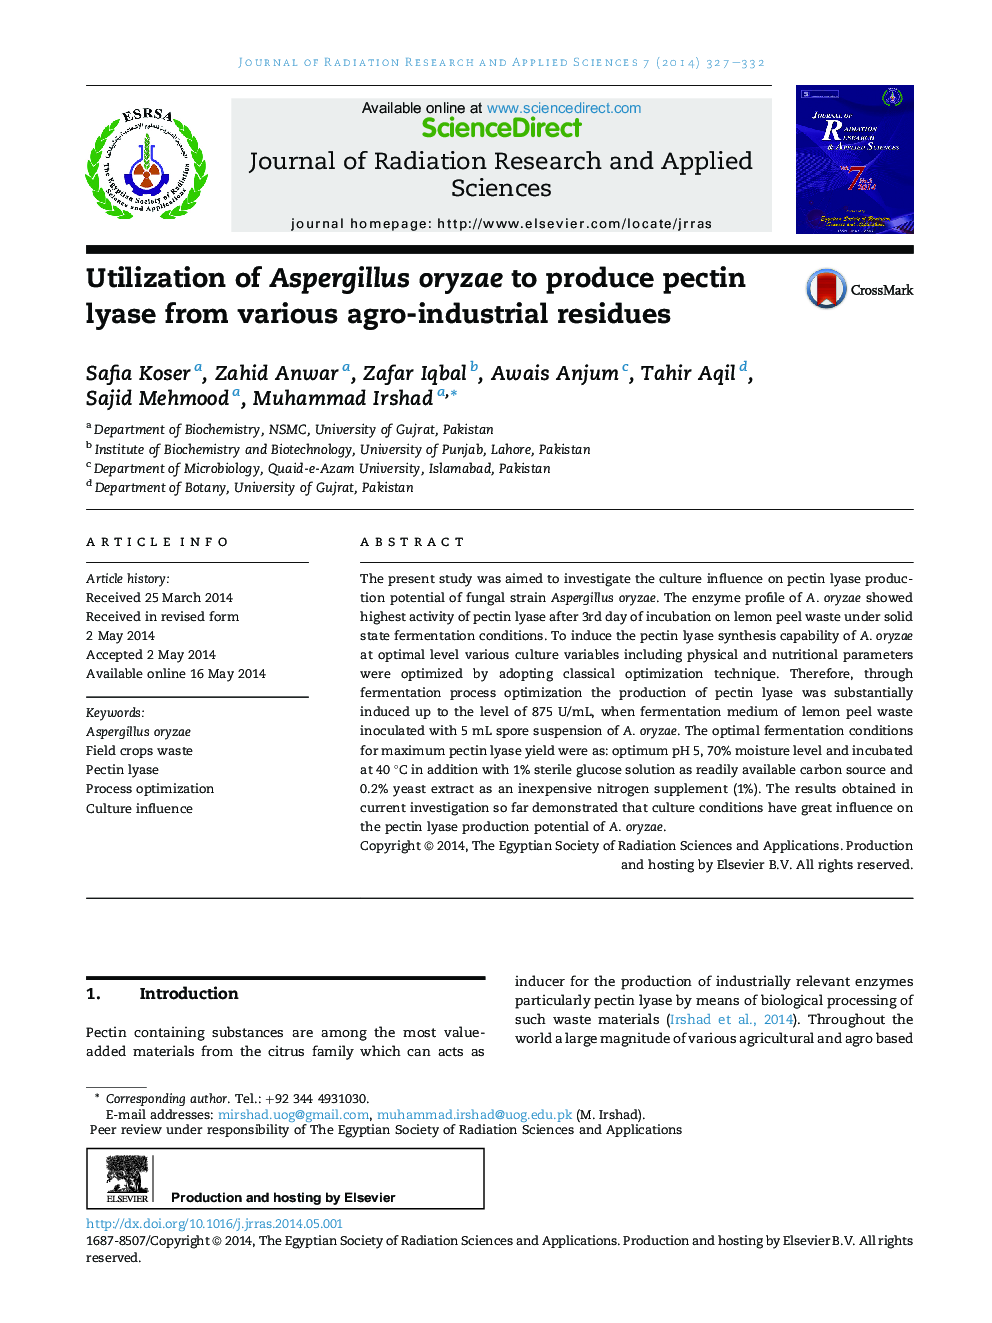 Utilization of Aspergillus oryzae to produce pectin lyase from various agro-industrial residues 